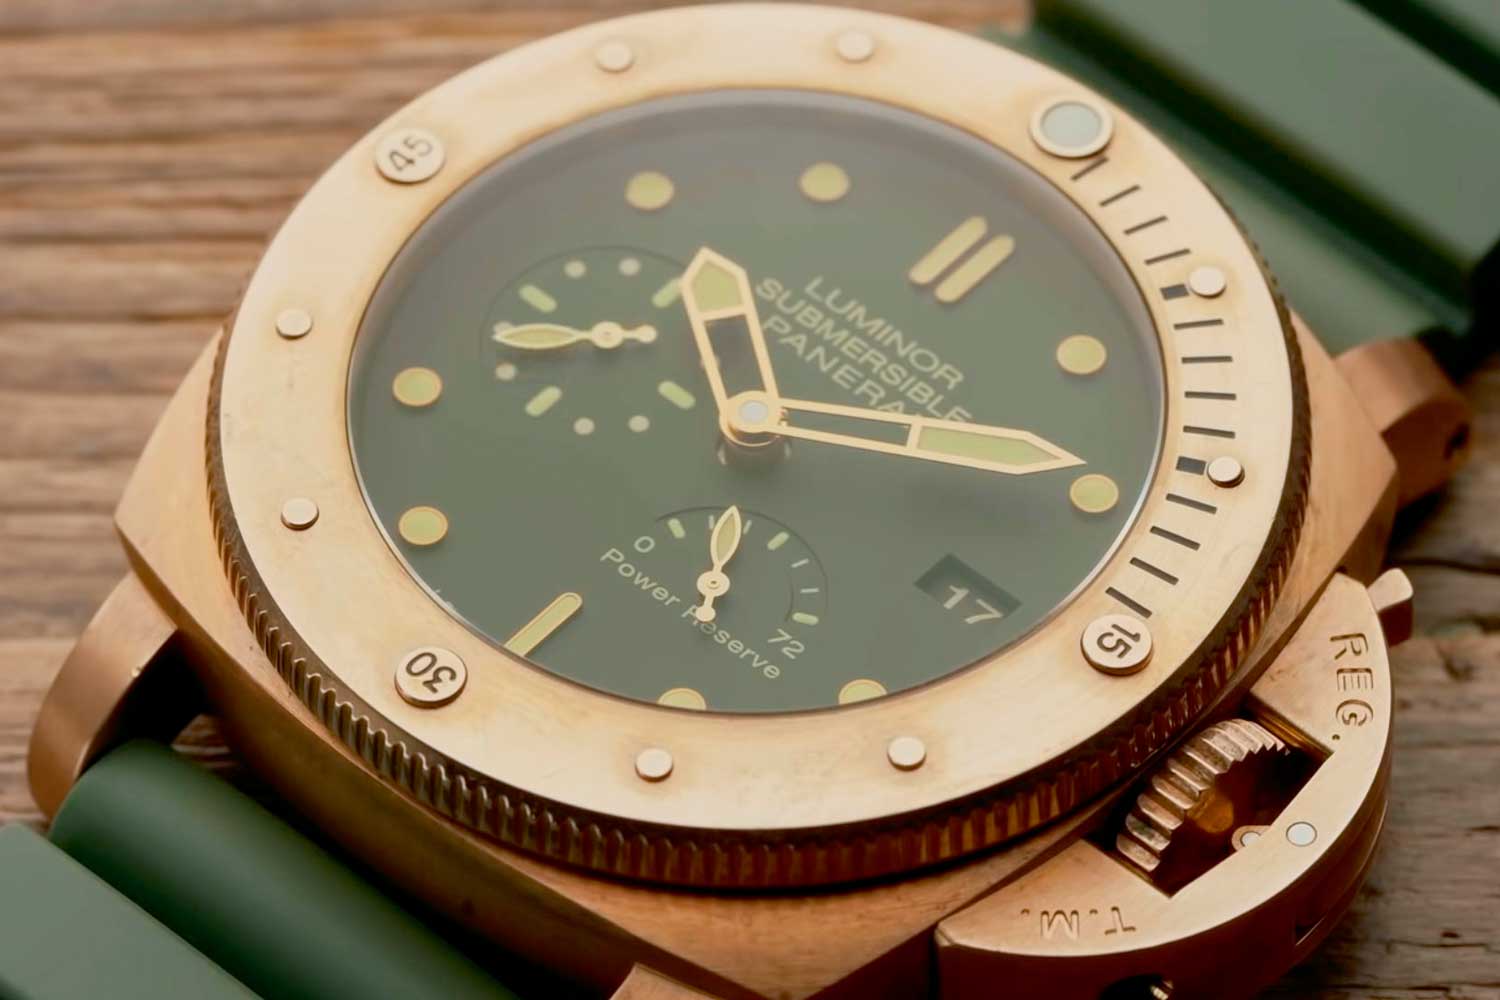 The 47mm behemoth that is the PAM00507 with a glorious green dial and marine-grade bronze case